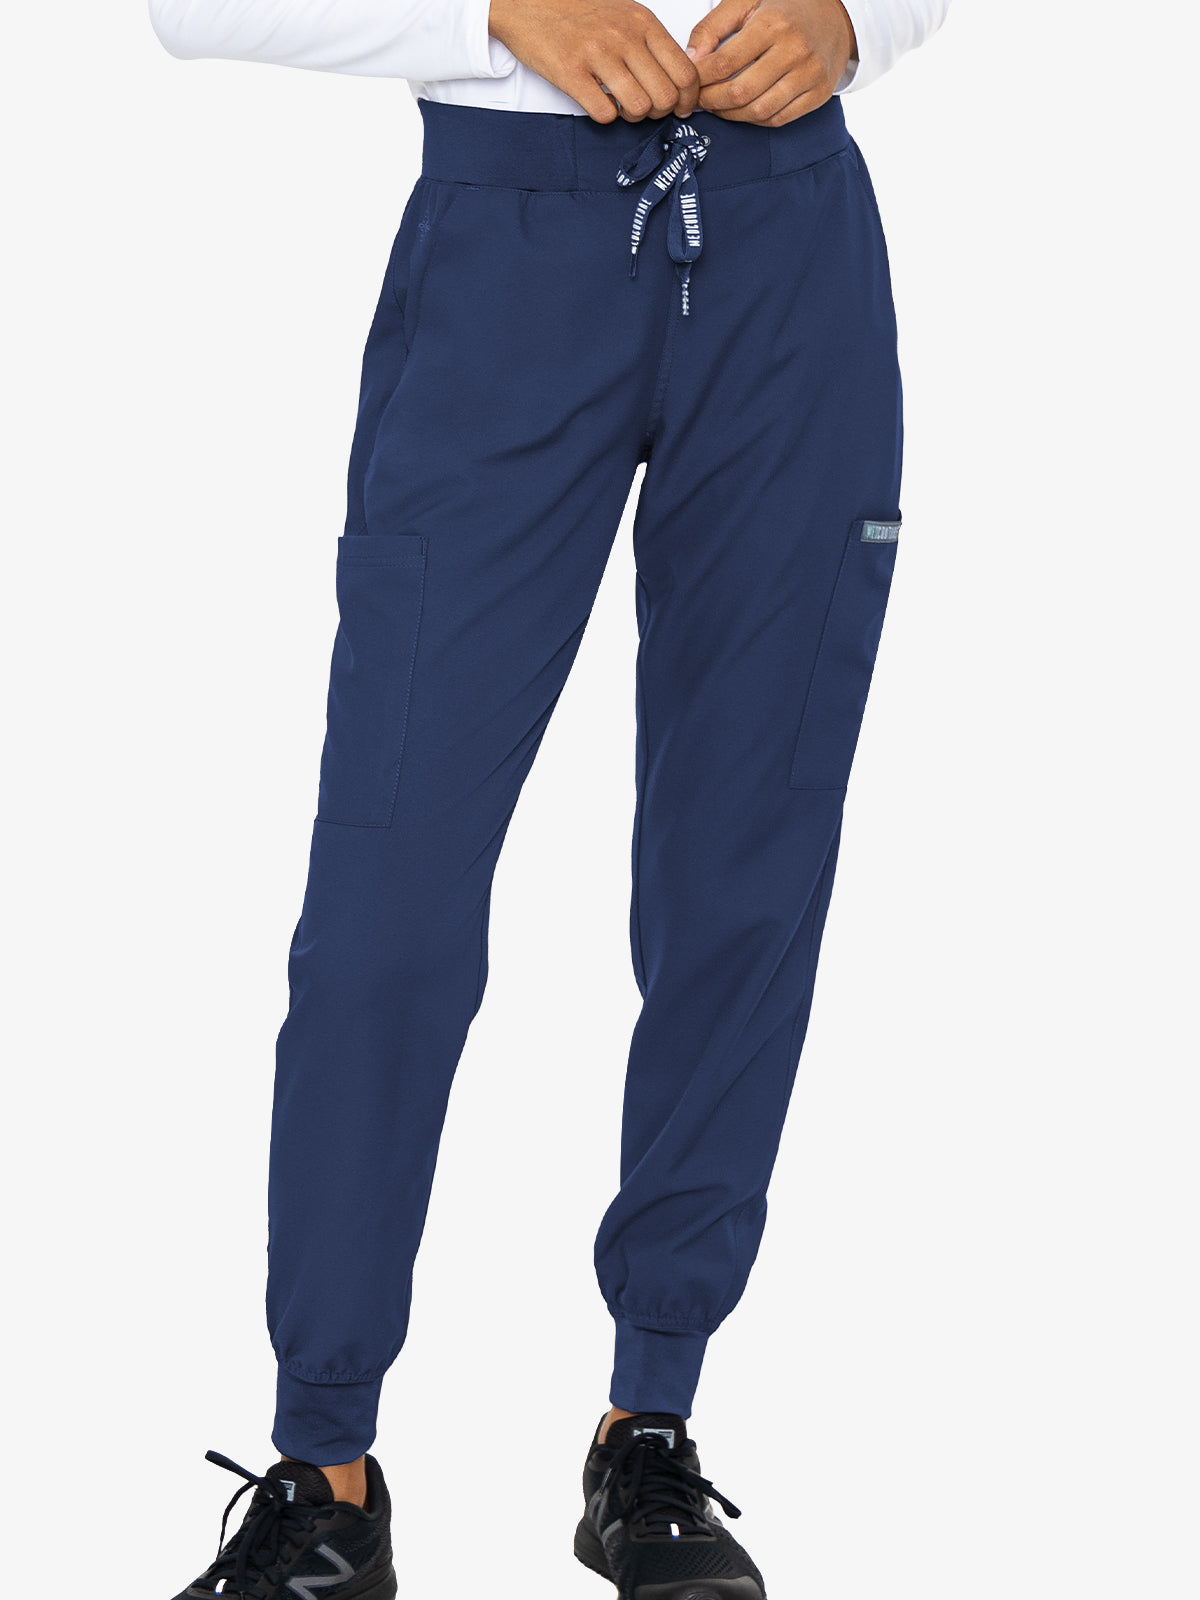 Med Couture 2711 Insight Jogger Pant Navy Blue